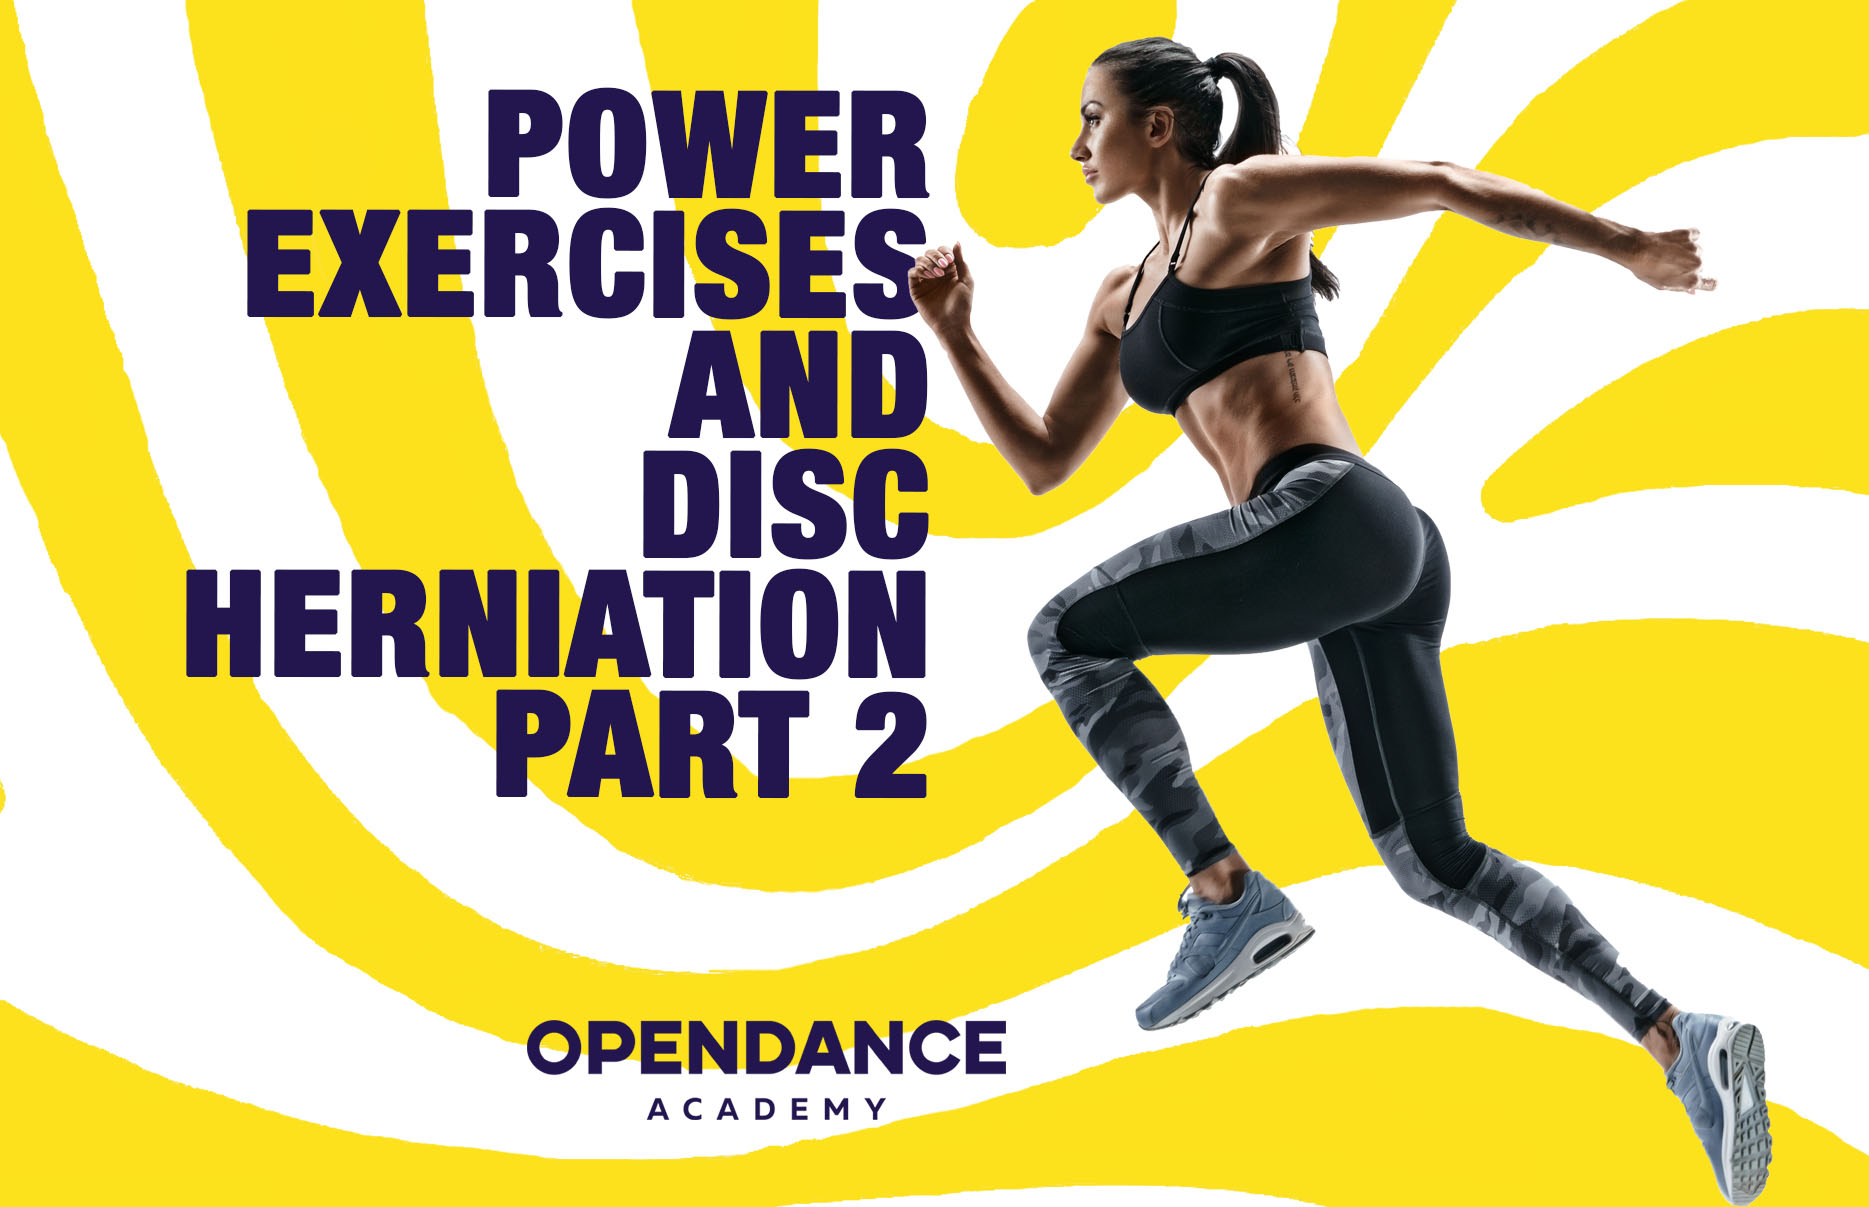 Power Exercises and Disc Herniation Part 2